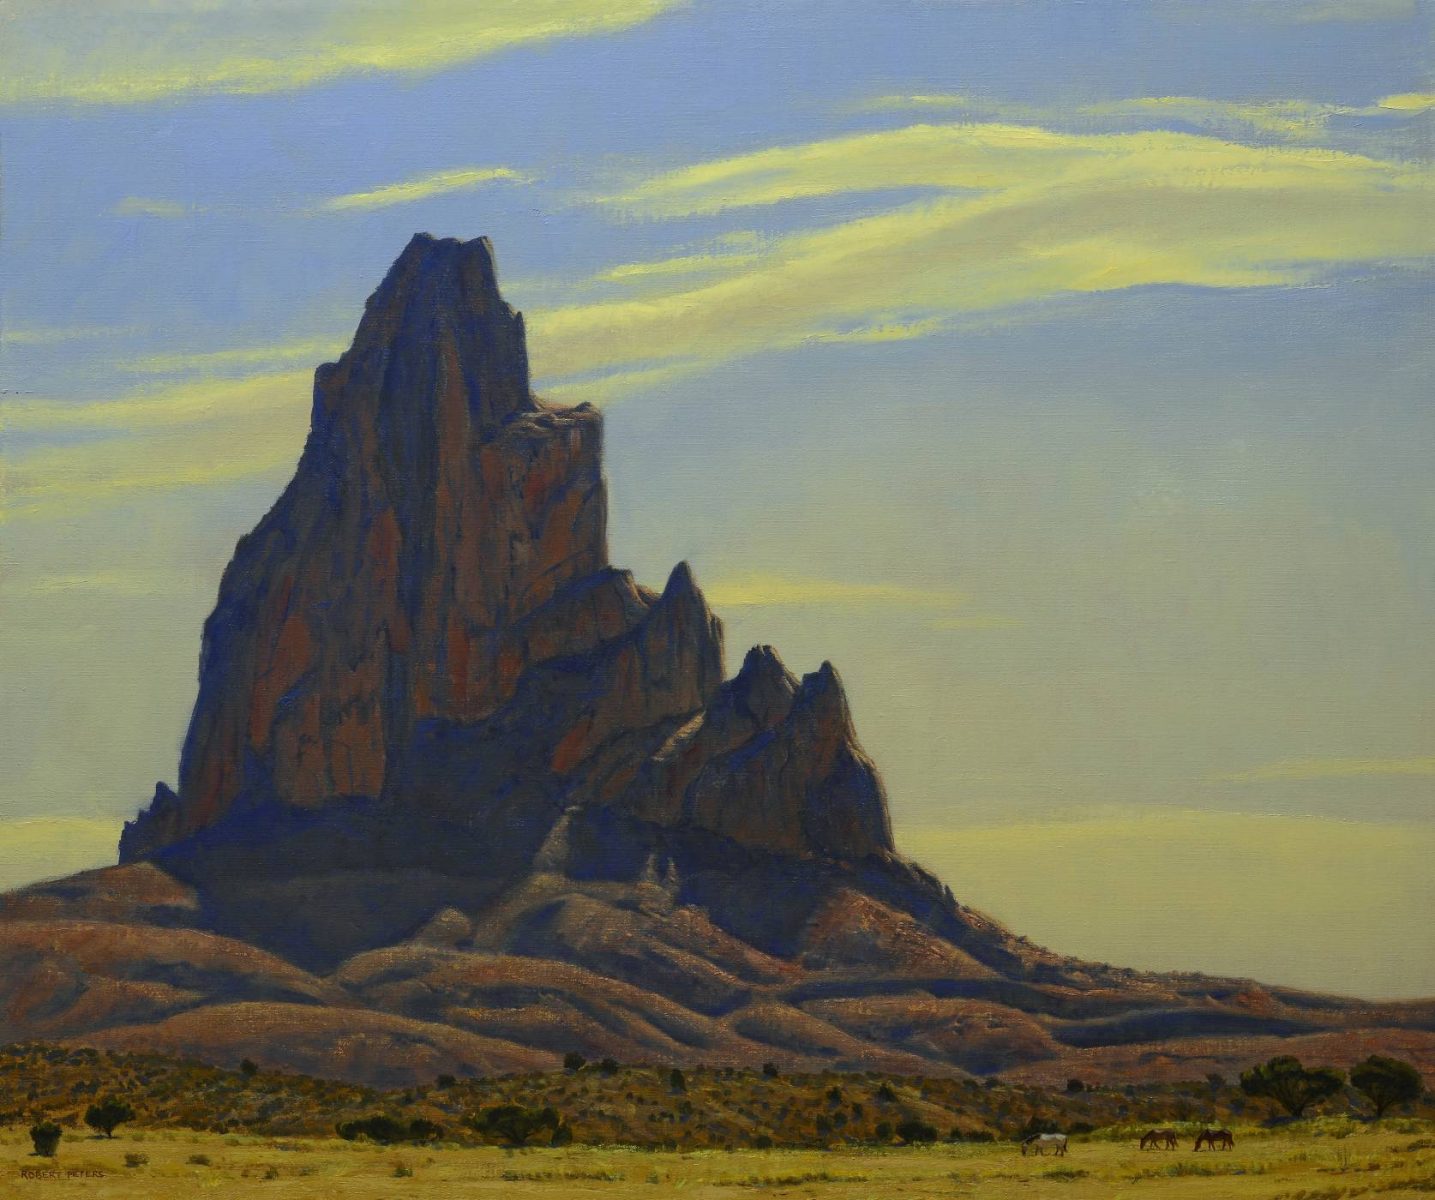 Timeless Giant, Monument Valley by artist Robert Peters